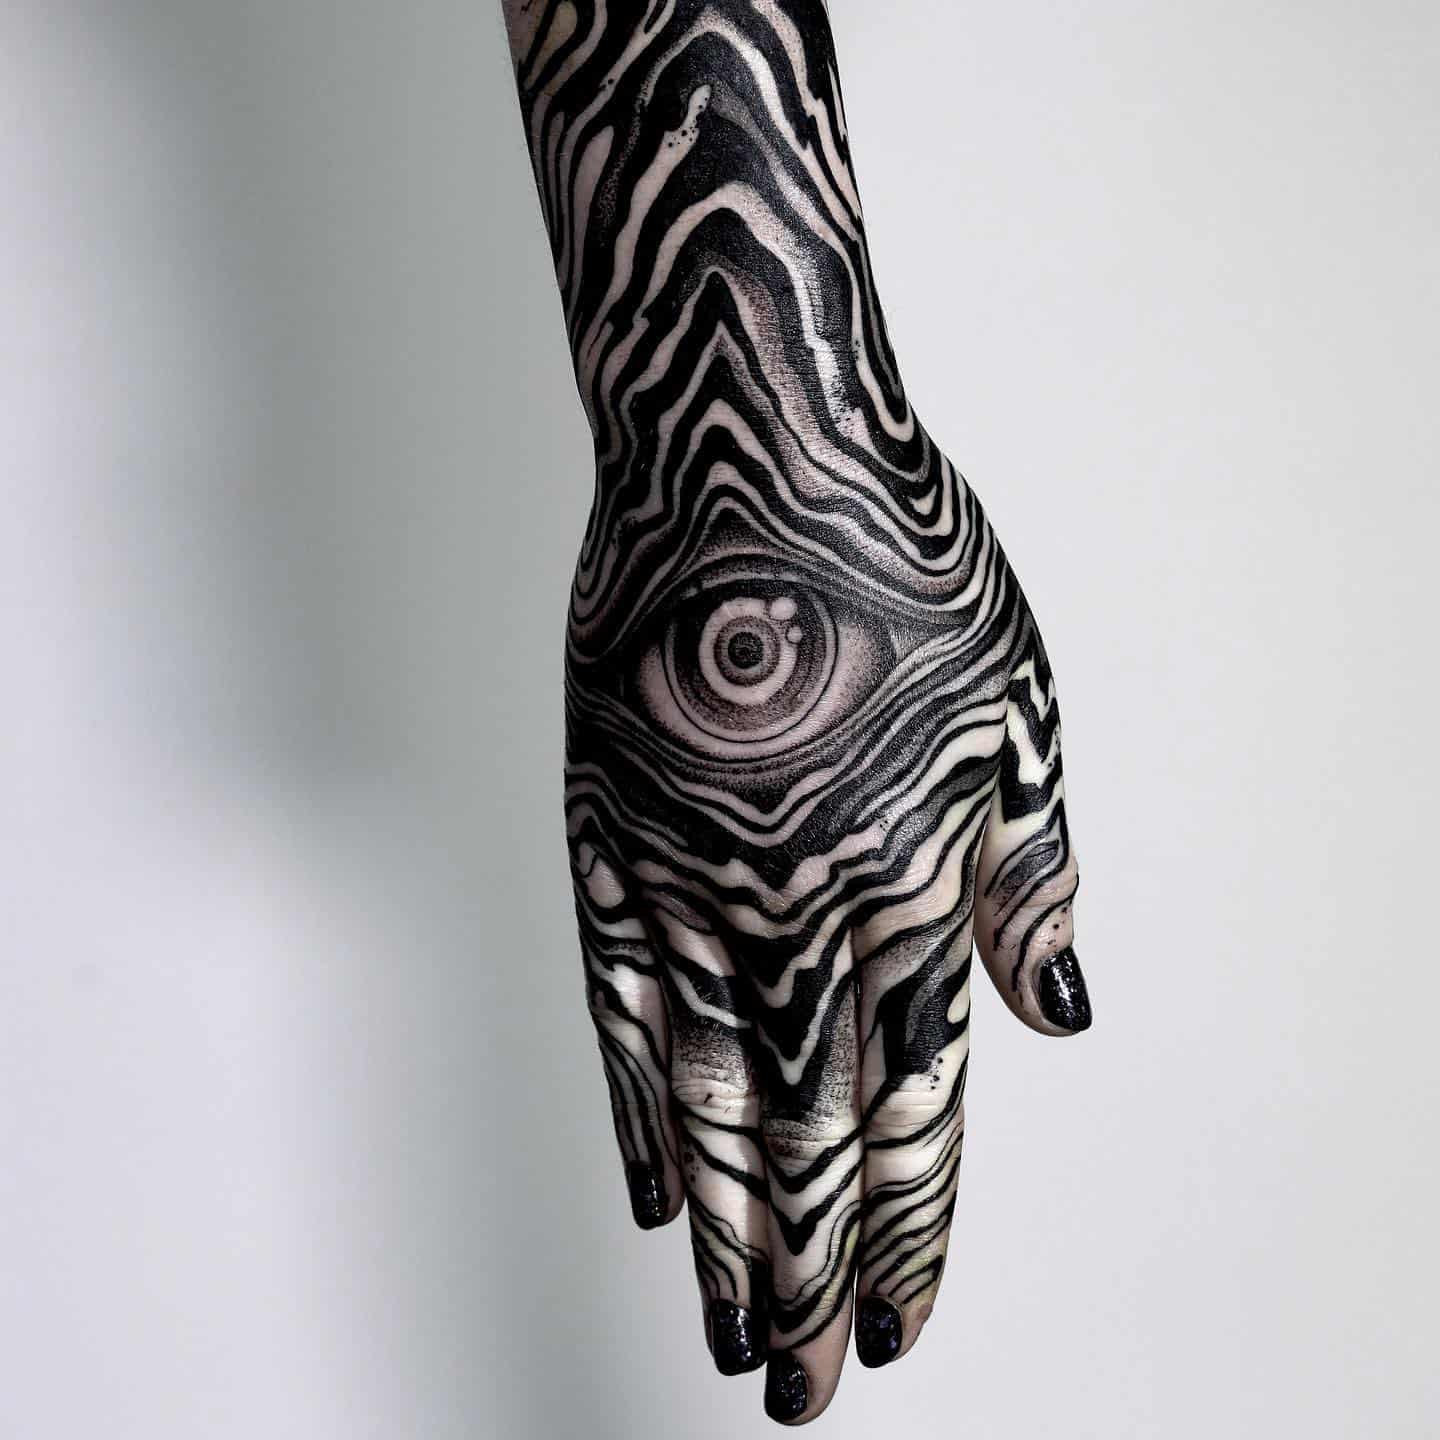 Unique abstract tattoo on hand by p e s t e